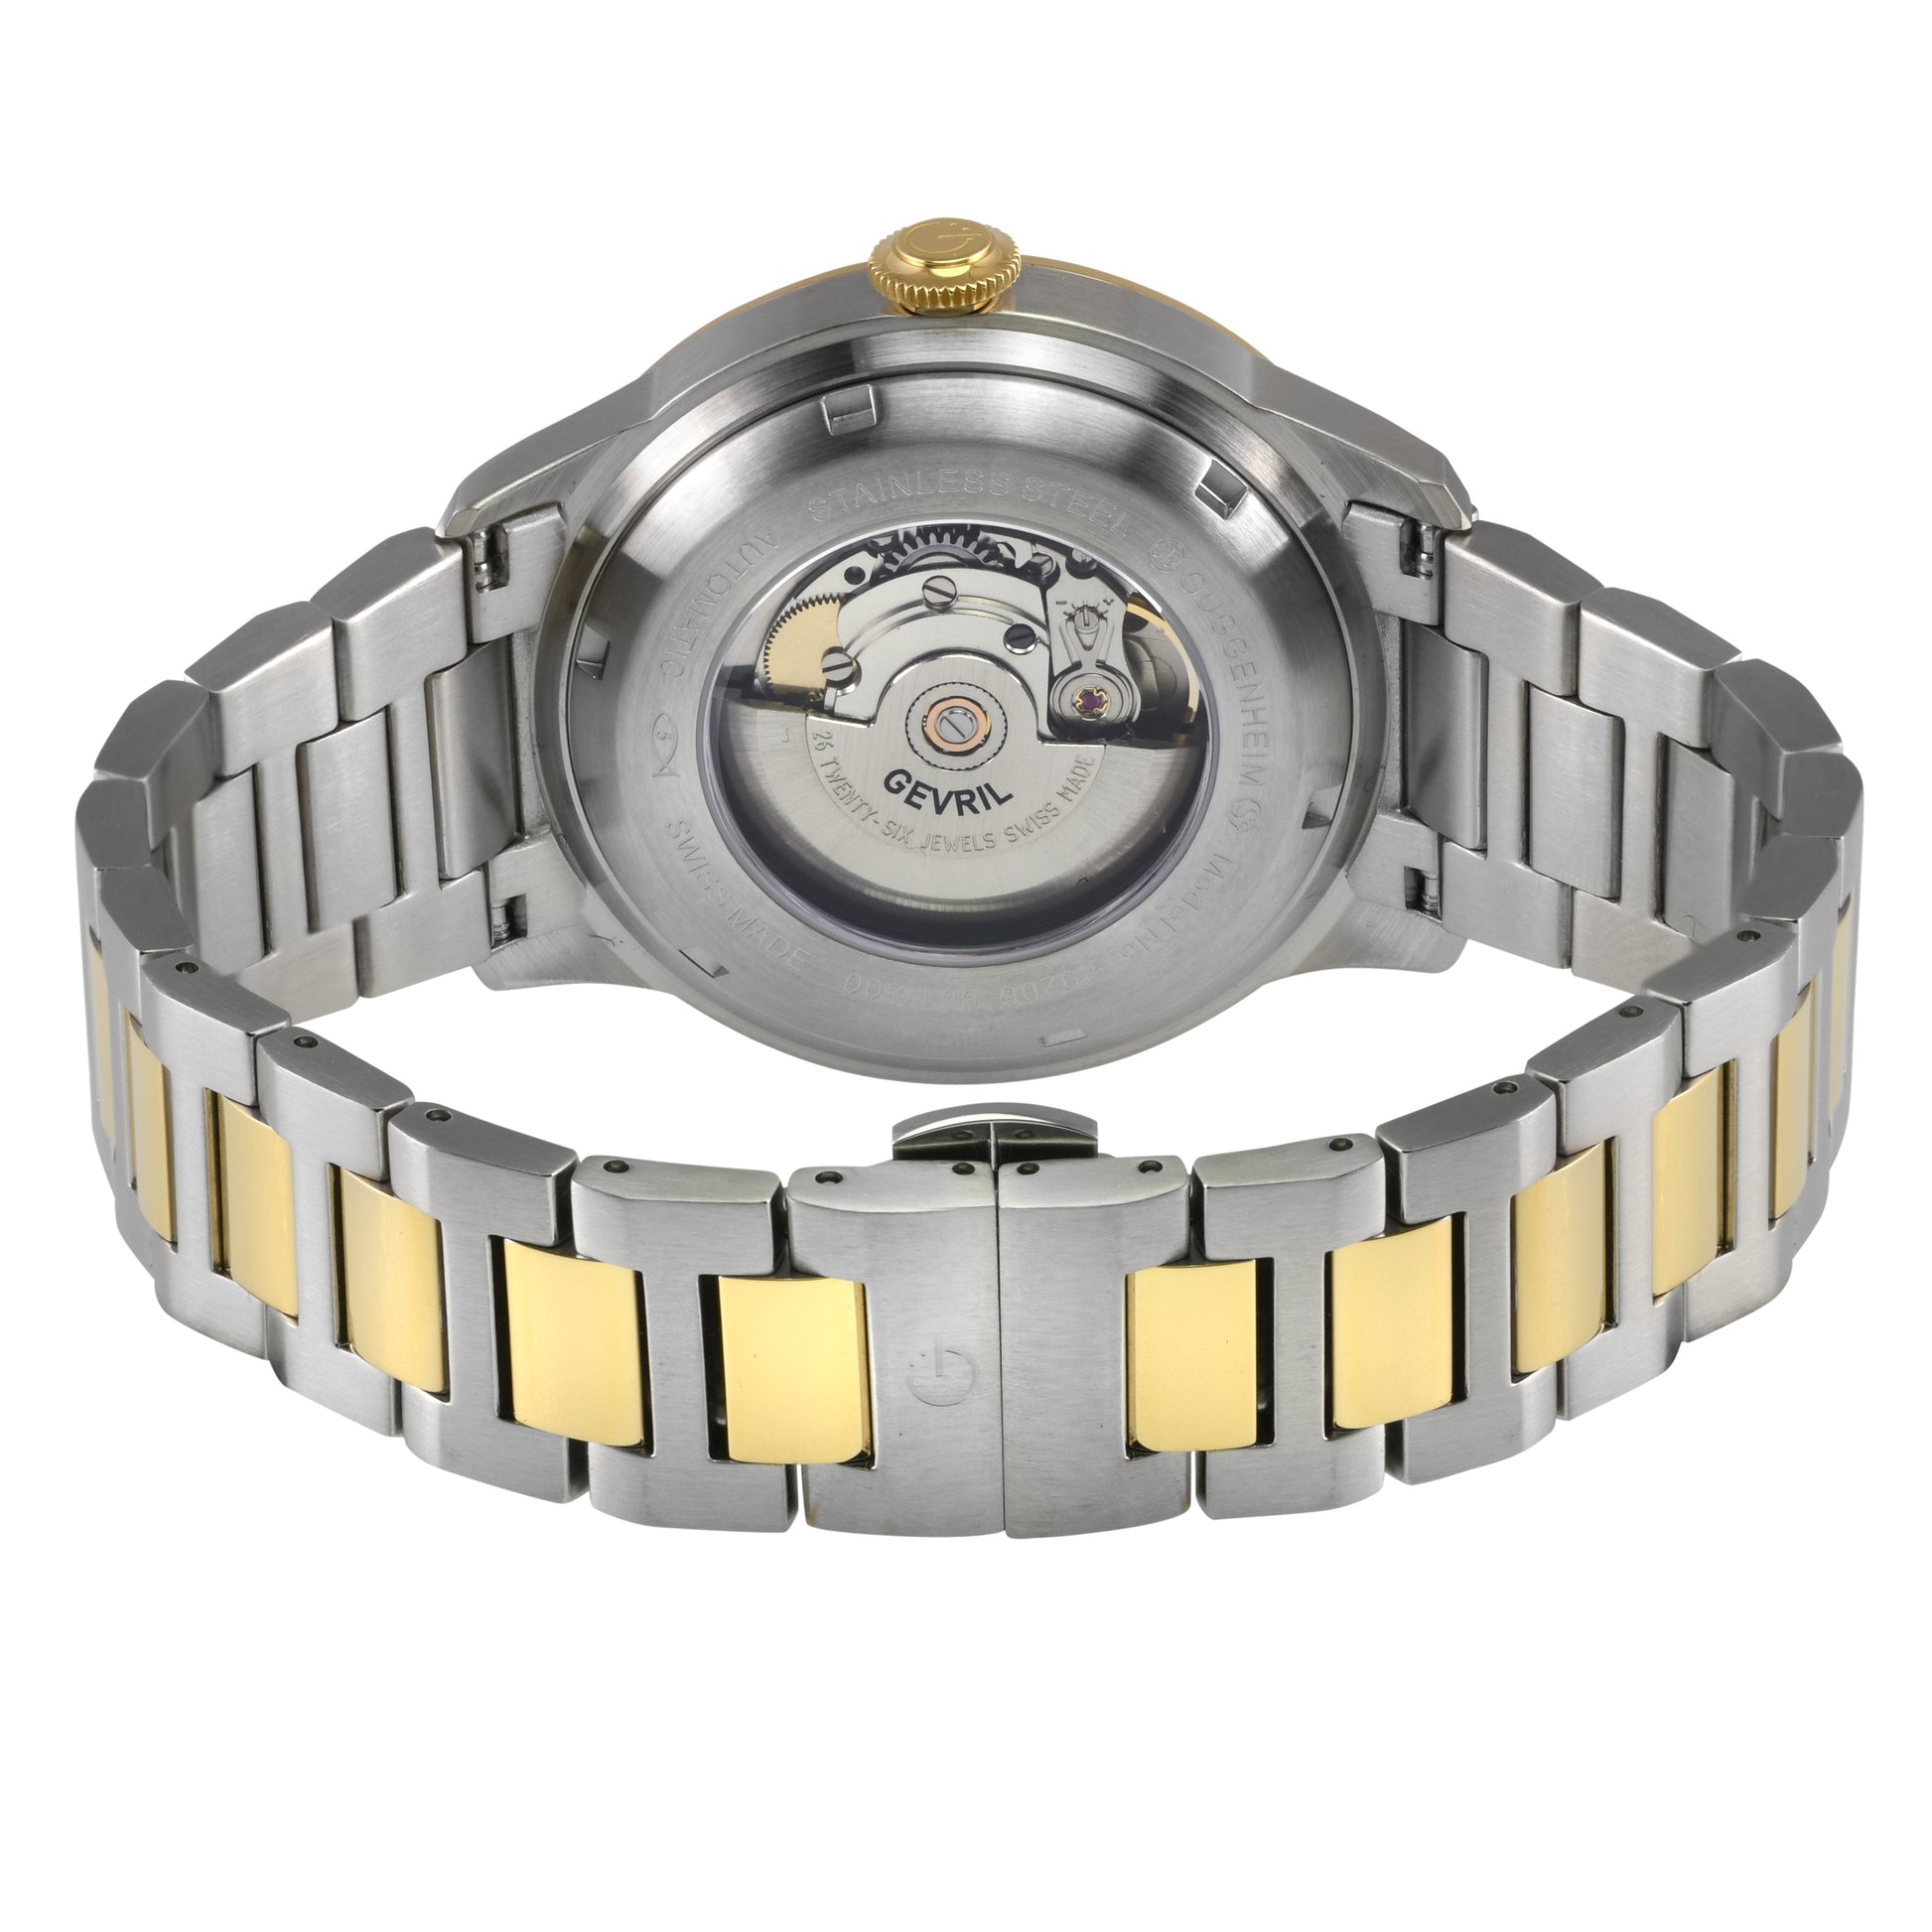 Gevril-Luxury-Swiss-Watches-Gevril Guggenheim Automatic-49206B